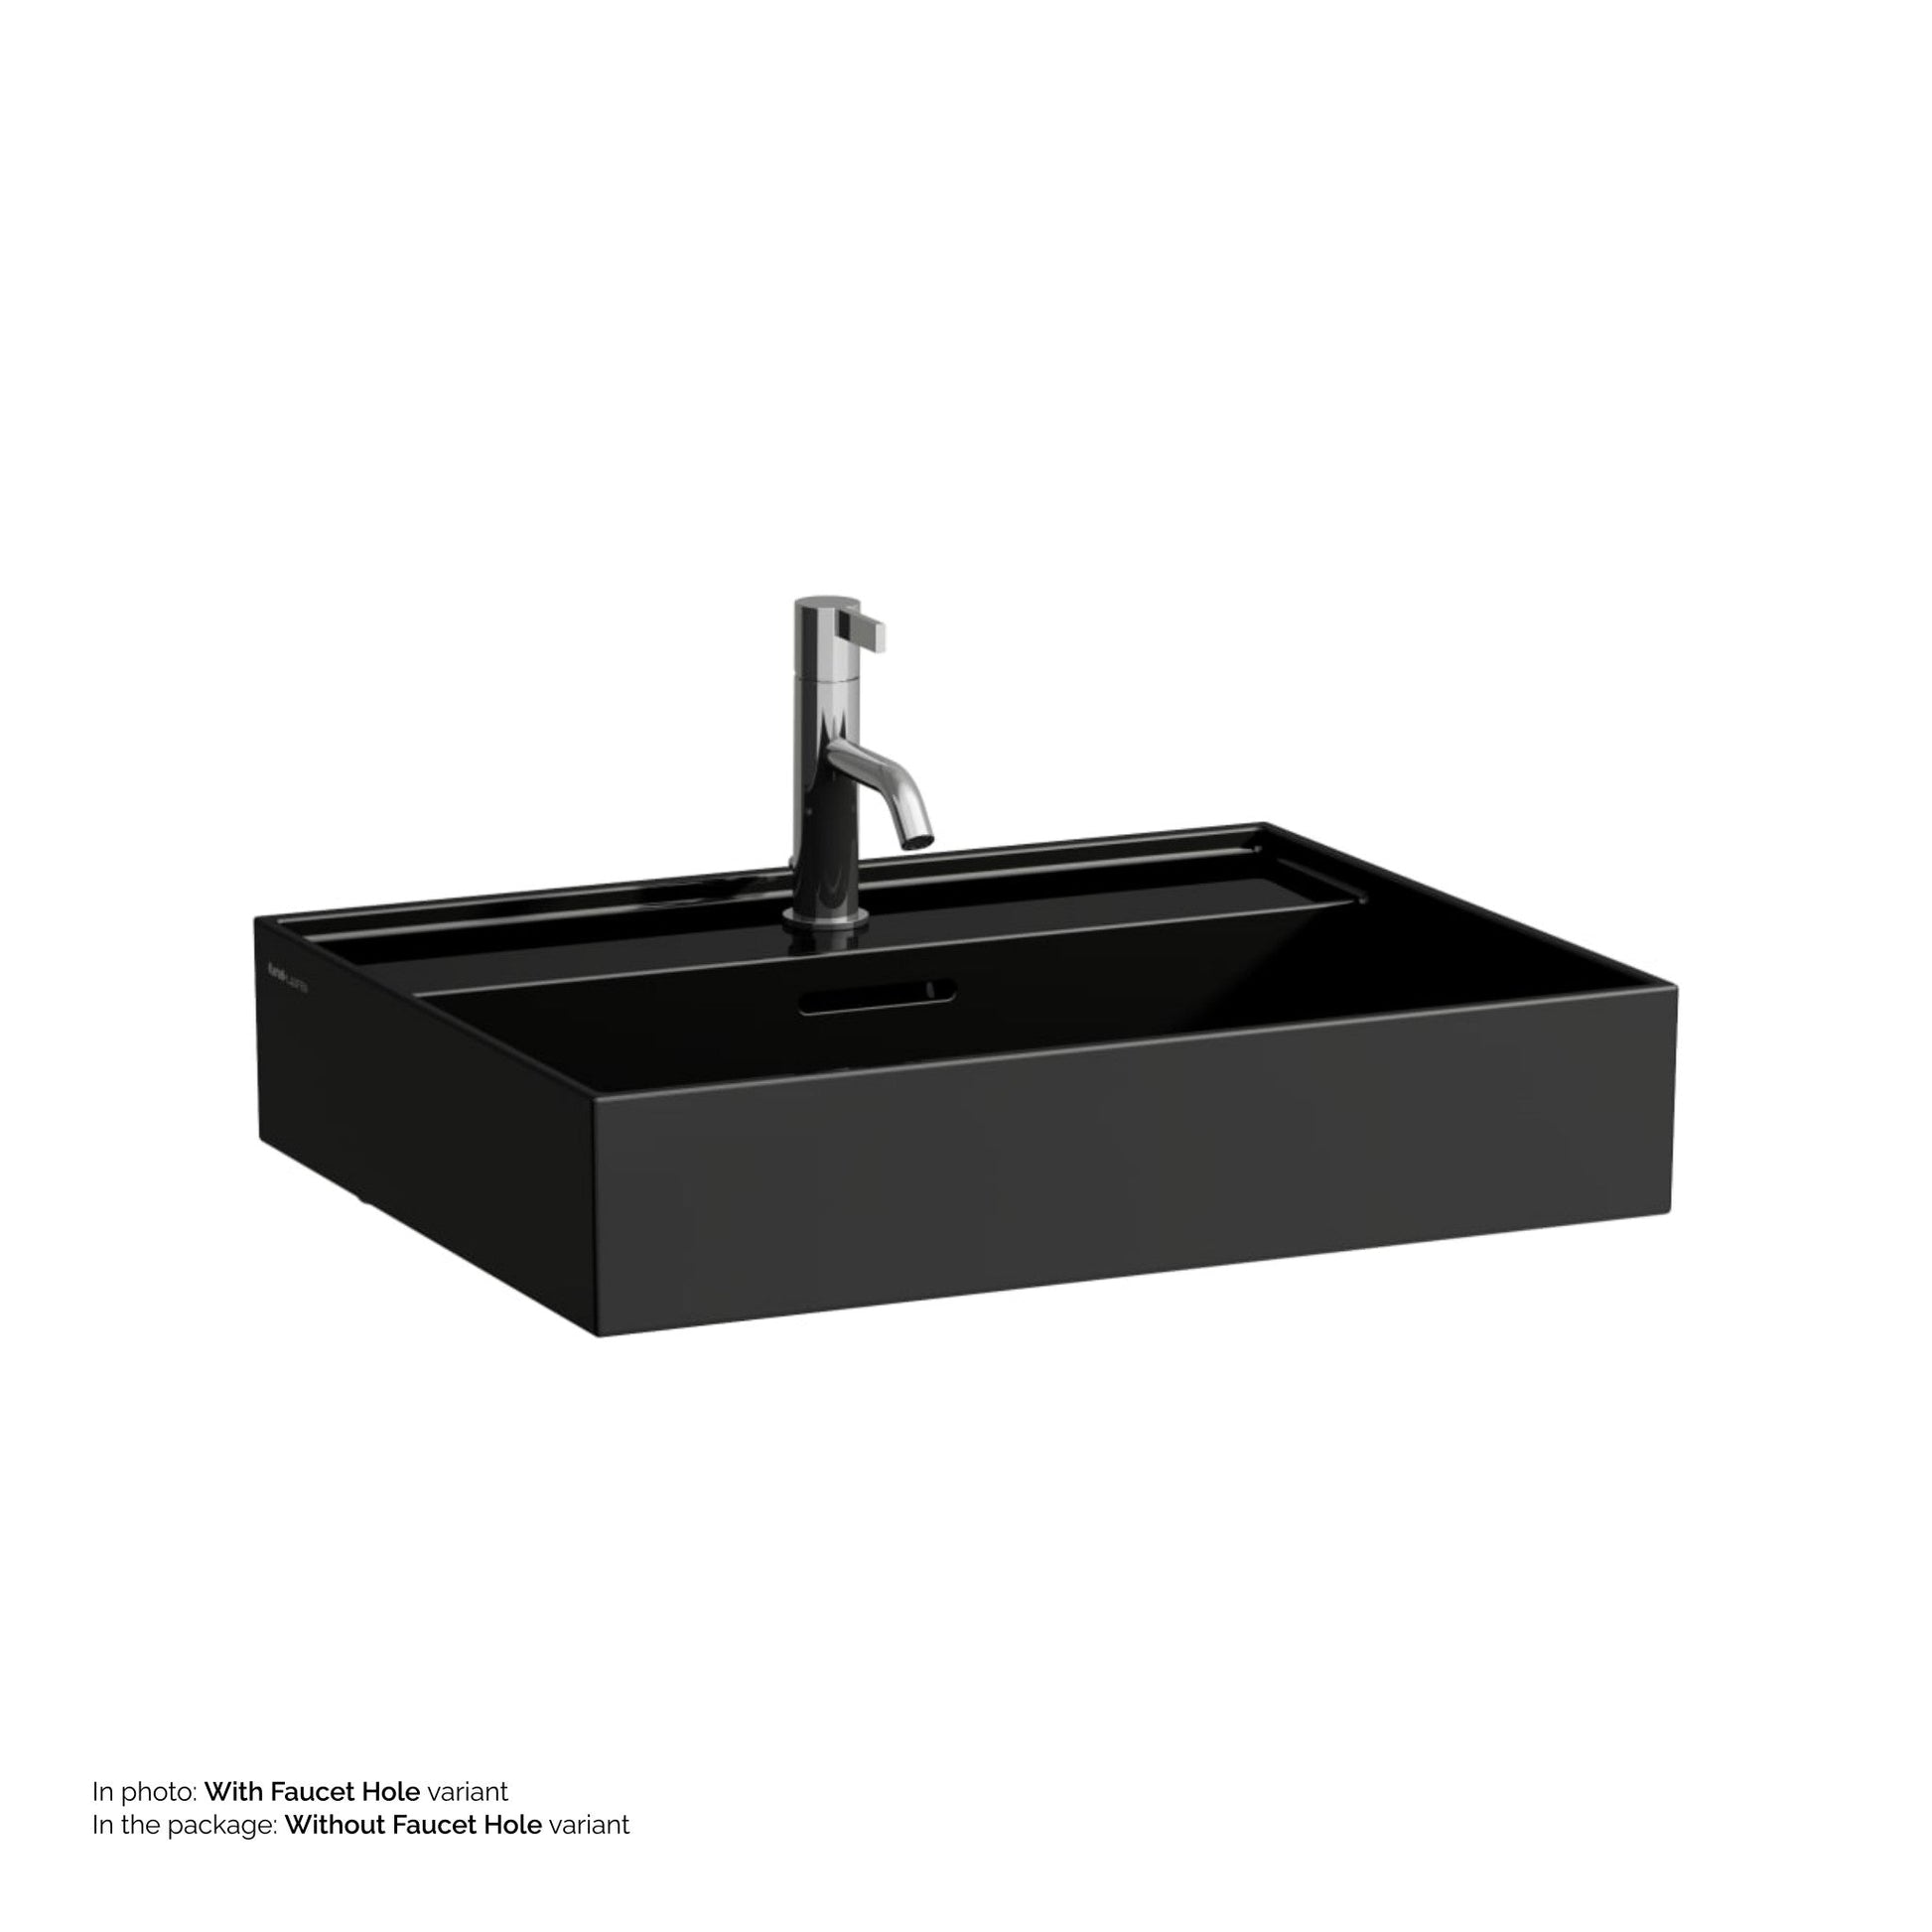 Laufen Kartell 24" x 18" Glossy Black Countertop Bathroom Sink Without Faucet Hole